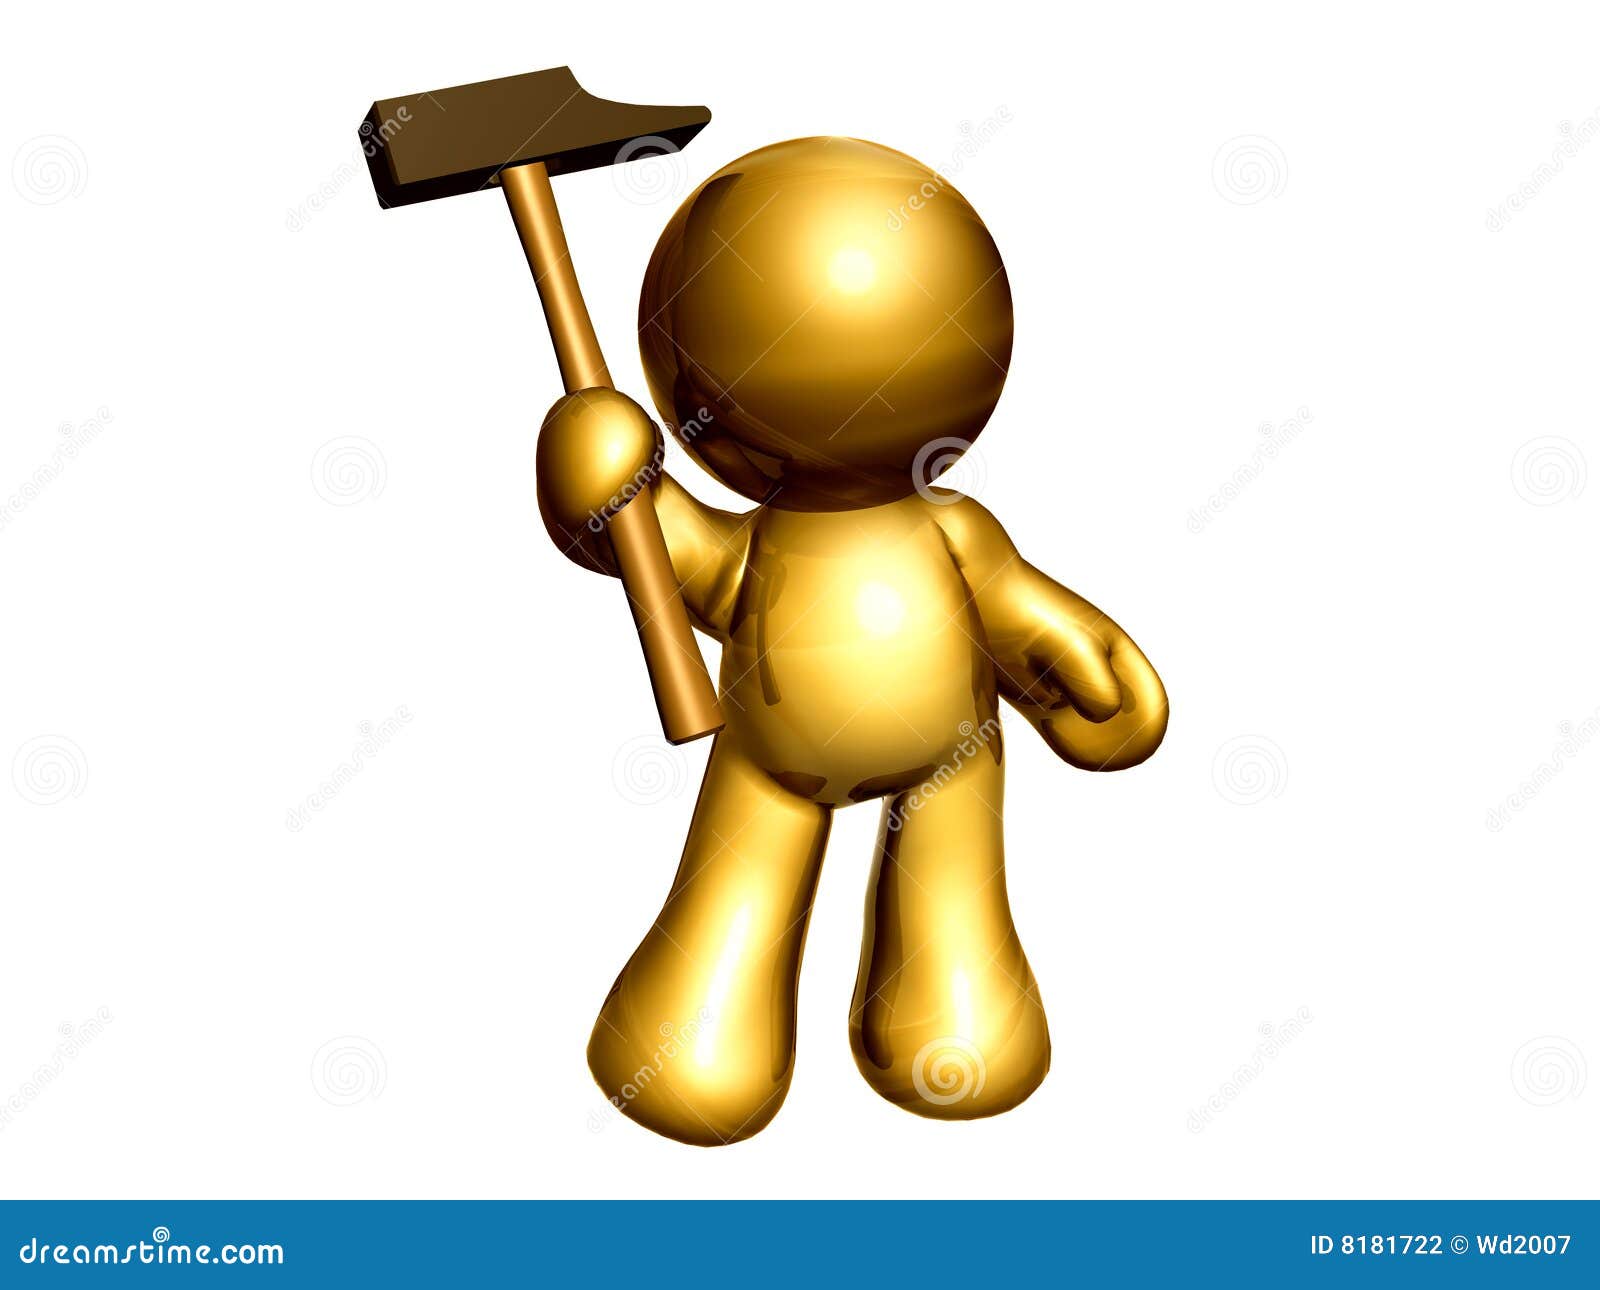 Figure Handy Icon Tools Stock Illustrations 53 Figure Handy Icon Tools Stock Illustrations Vectors Clipart Dreamstime